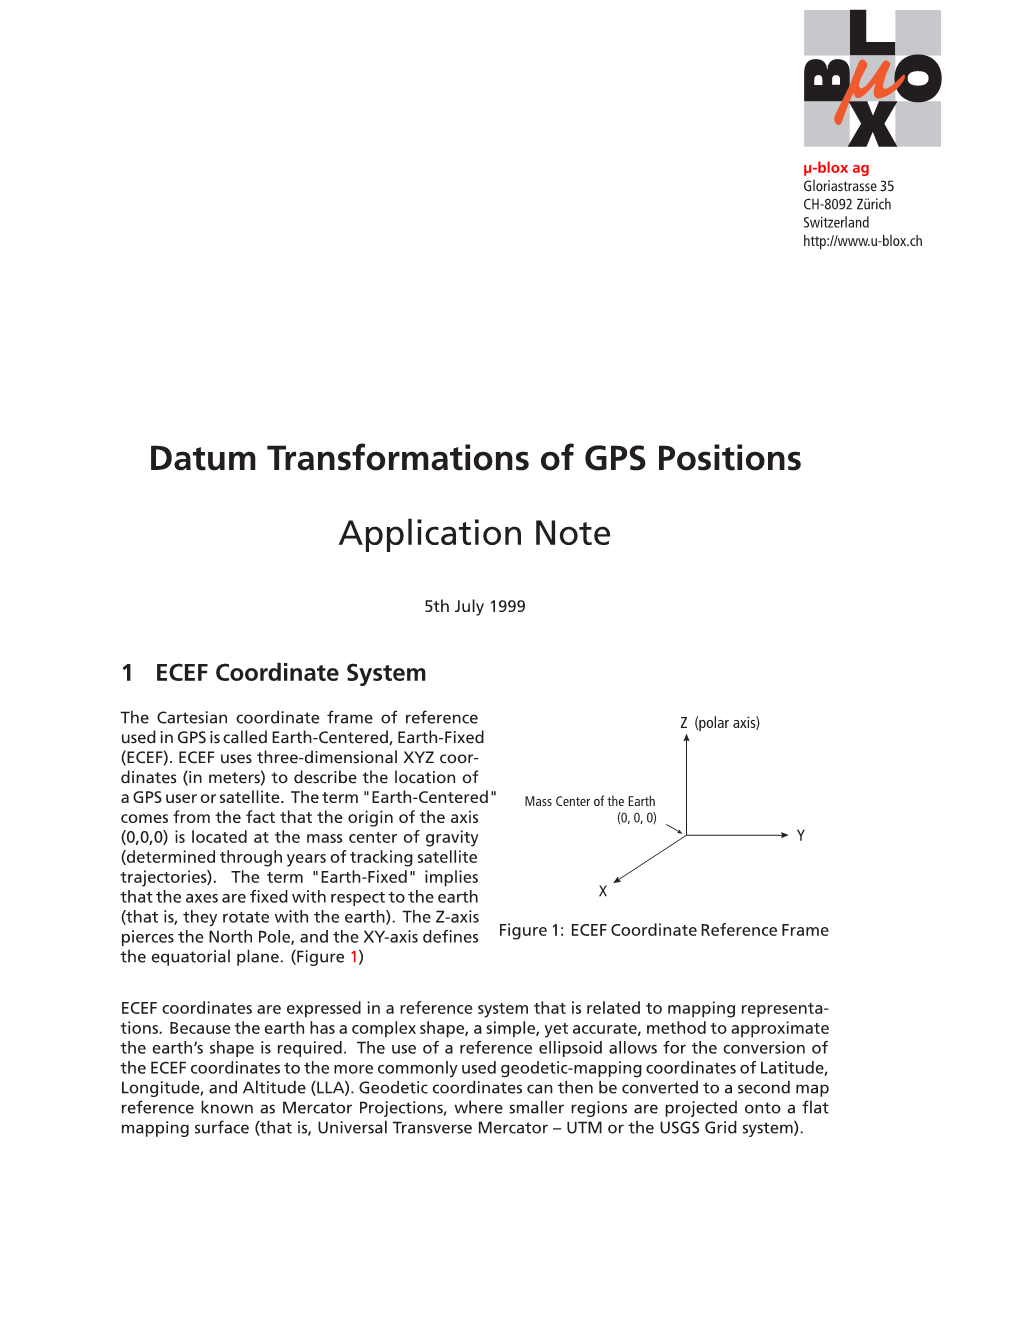 Datum Transformations of GPS Positions Application Note